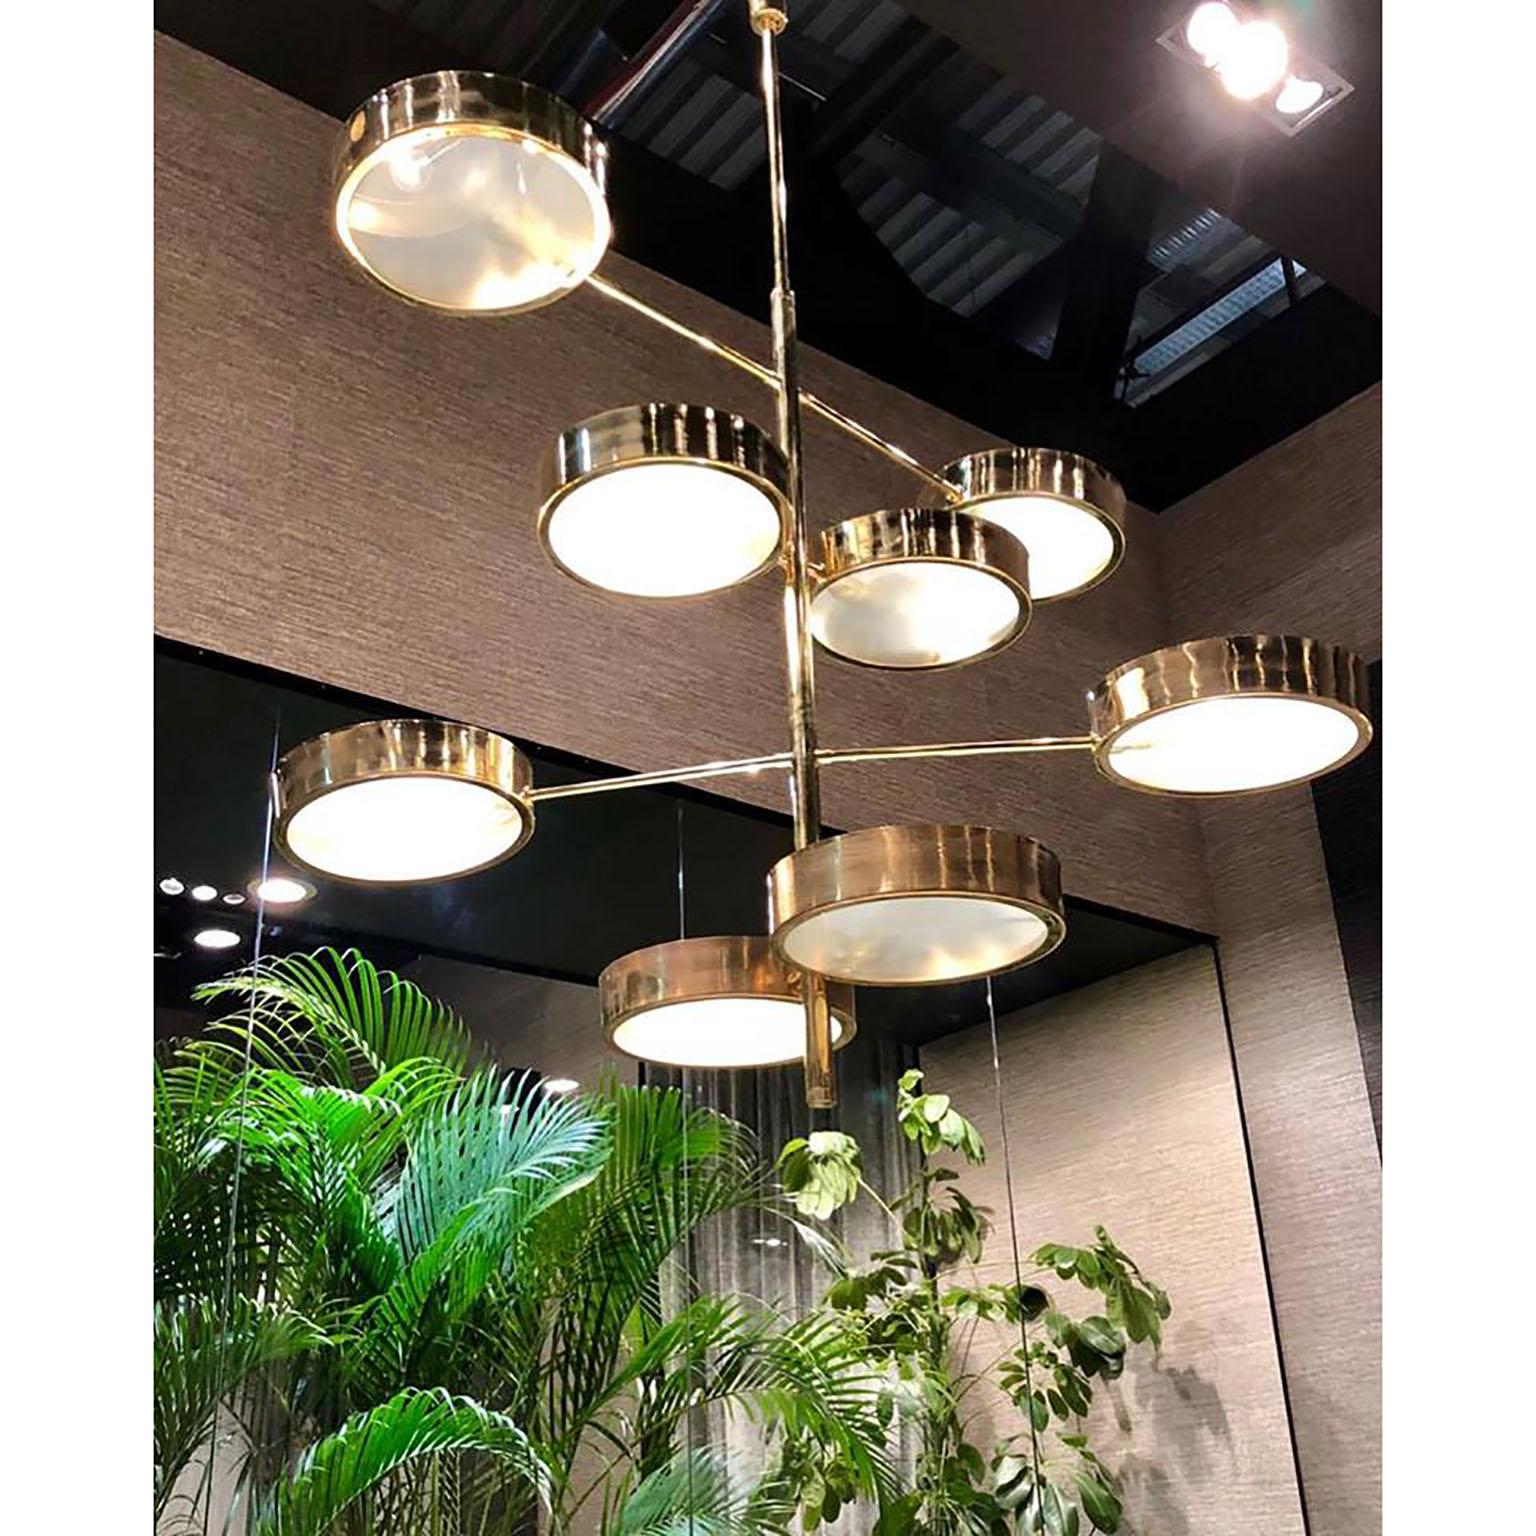 Important architectural ceiling lamp with eight lights.
Four adjustable arms made of brass, ending each side with a brass and glass shade.
Dimensions: Slightly customizable both on vertical and horizontal
Height 130 cm (51.18 inches), diameter circa